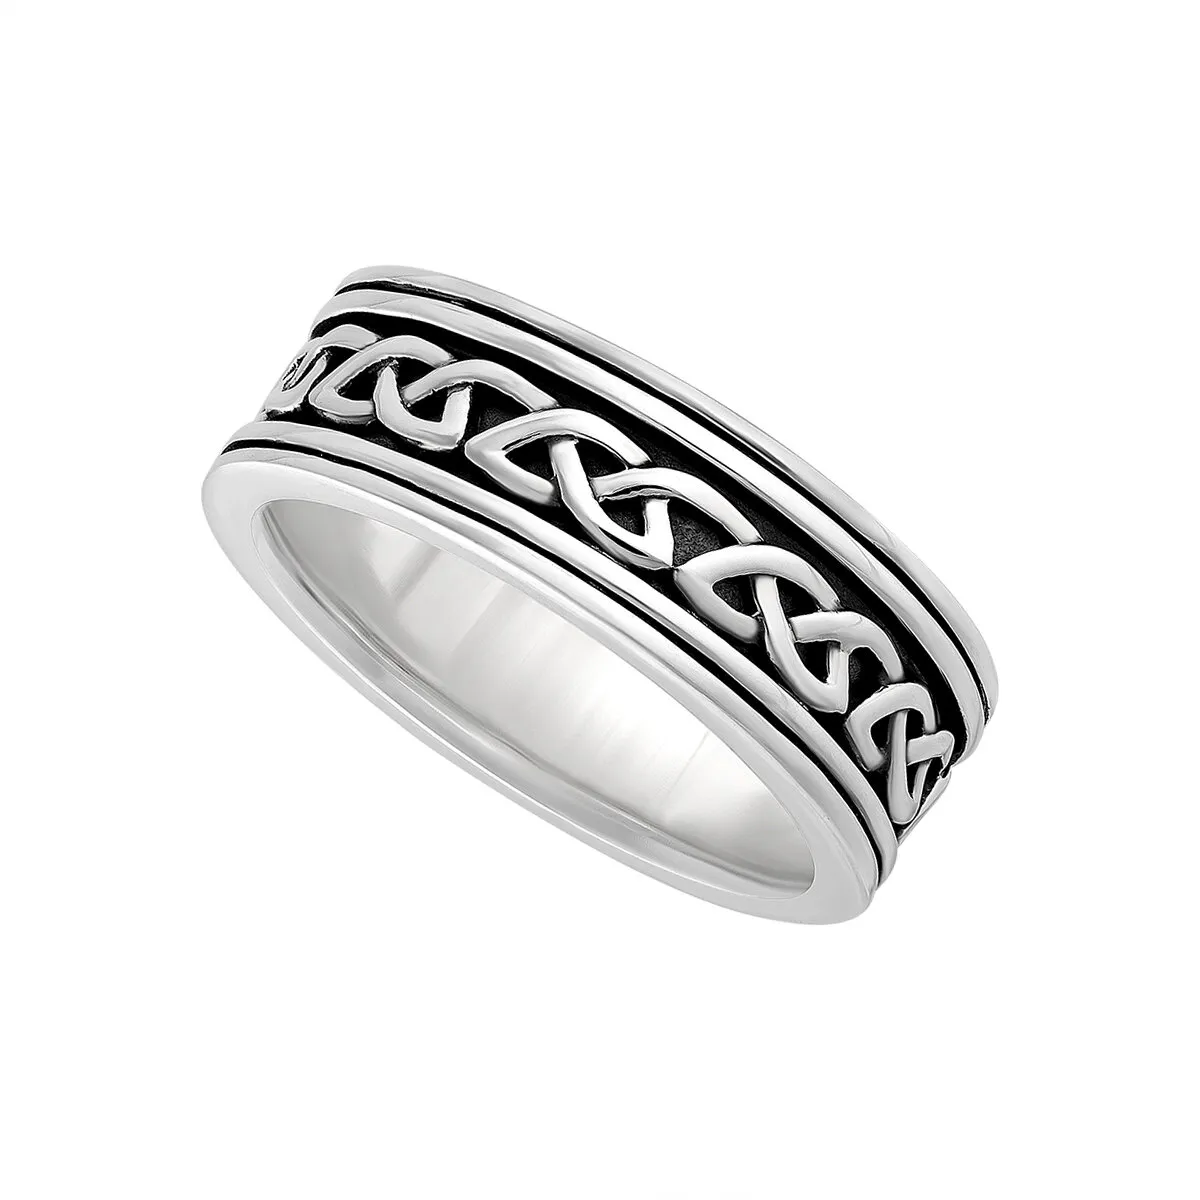 Gents Oxidised Sterling Silver Celtic Knot Ring...